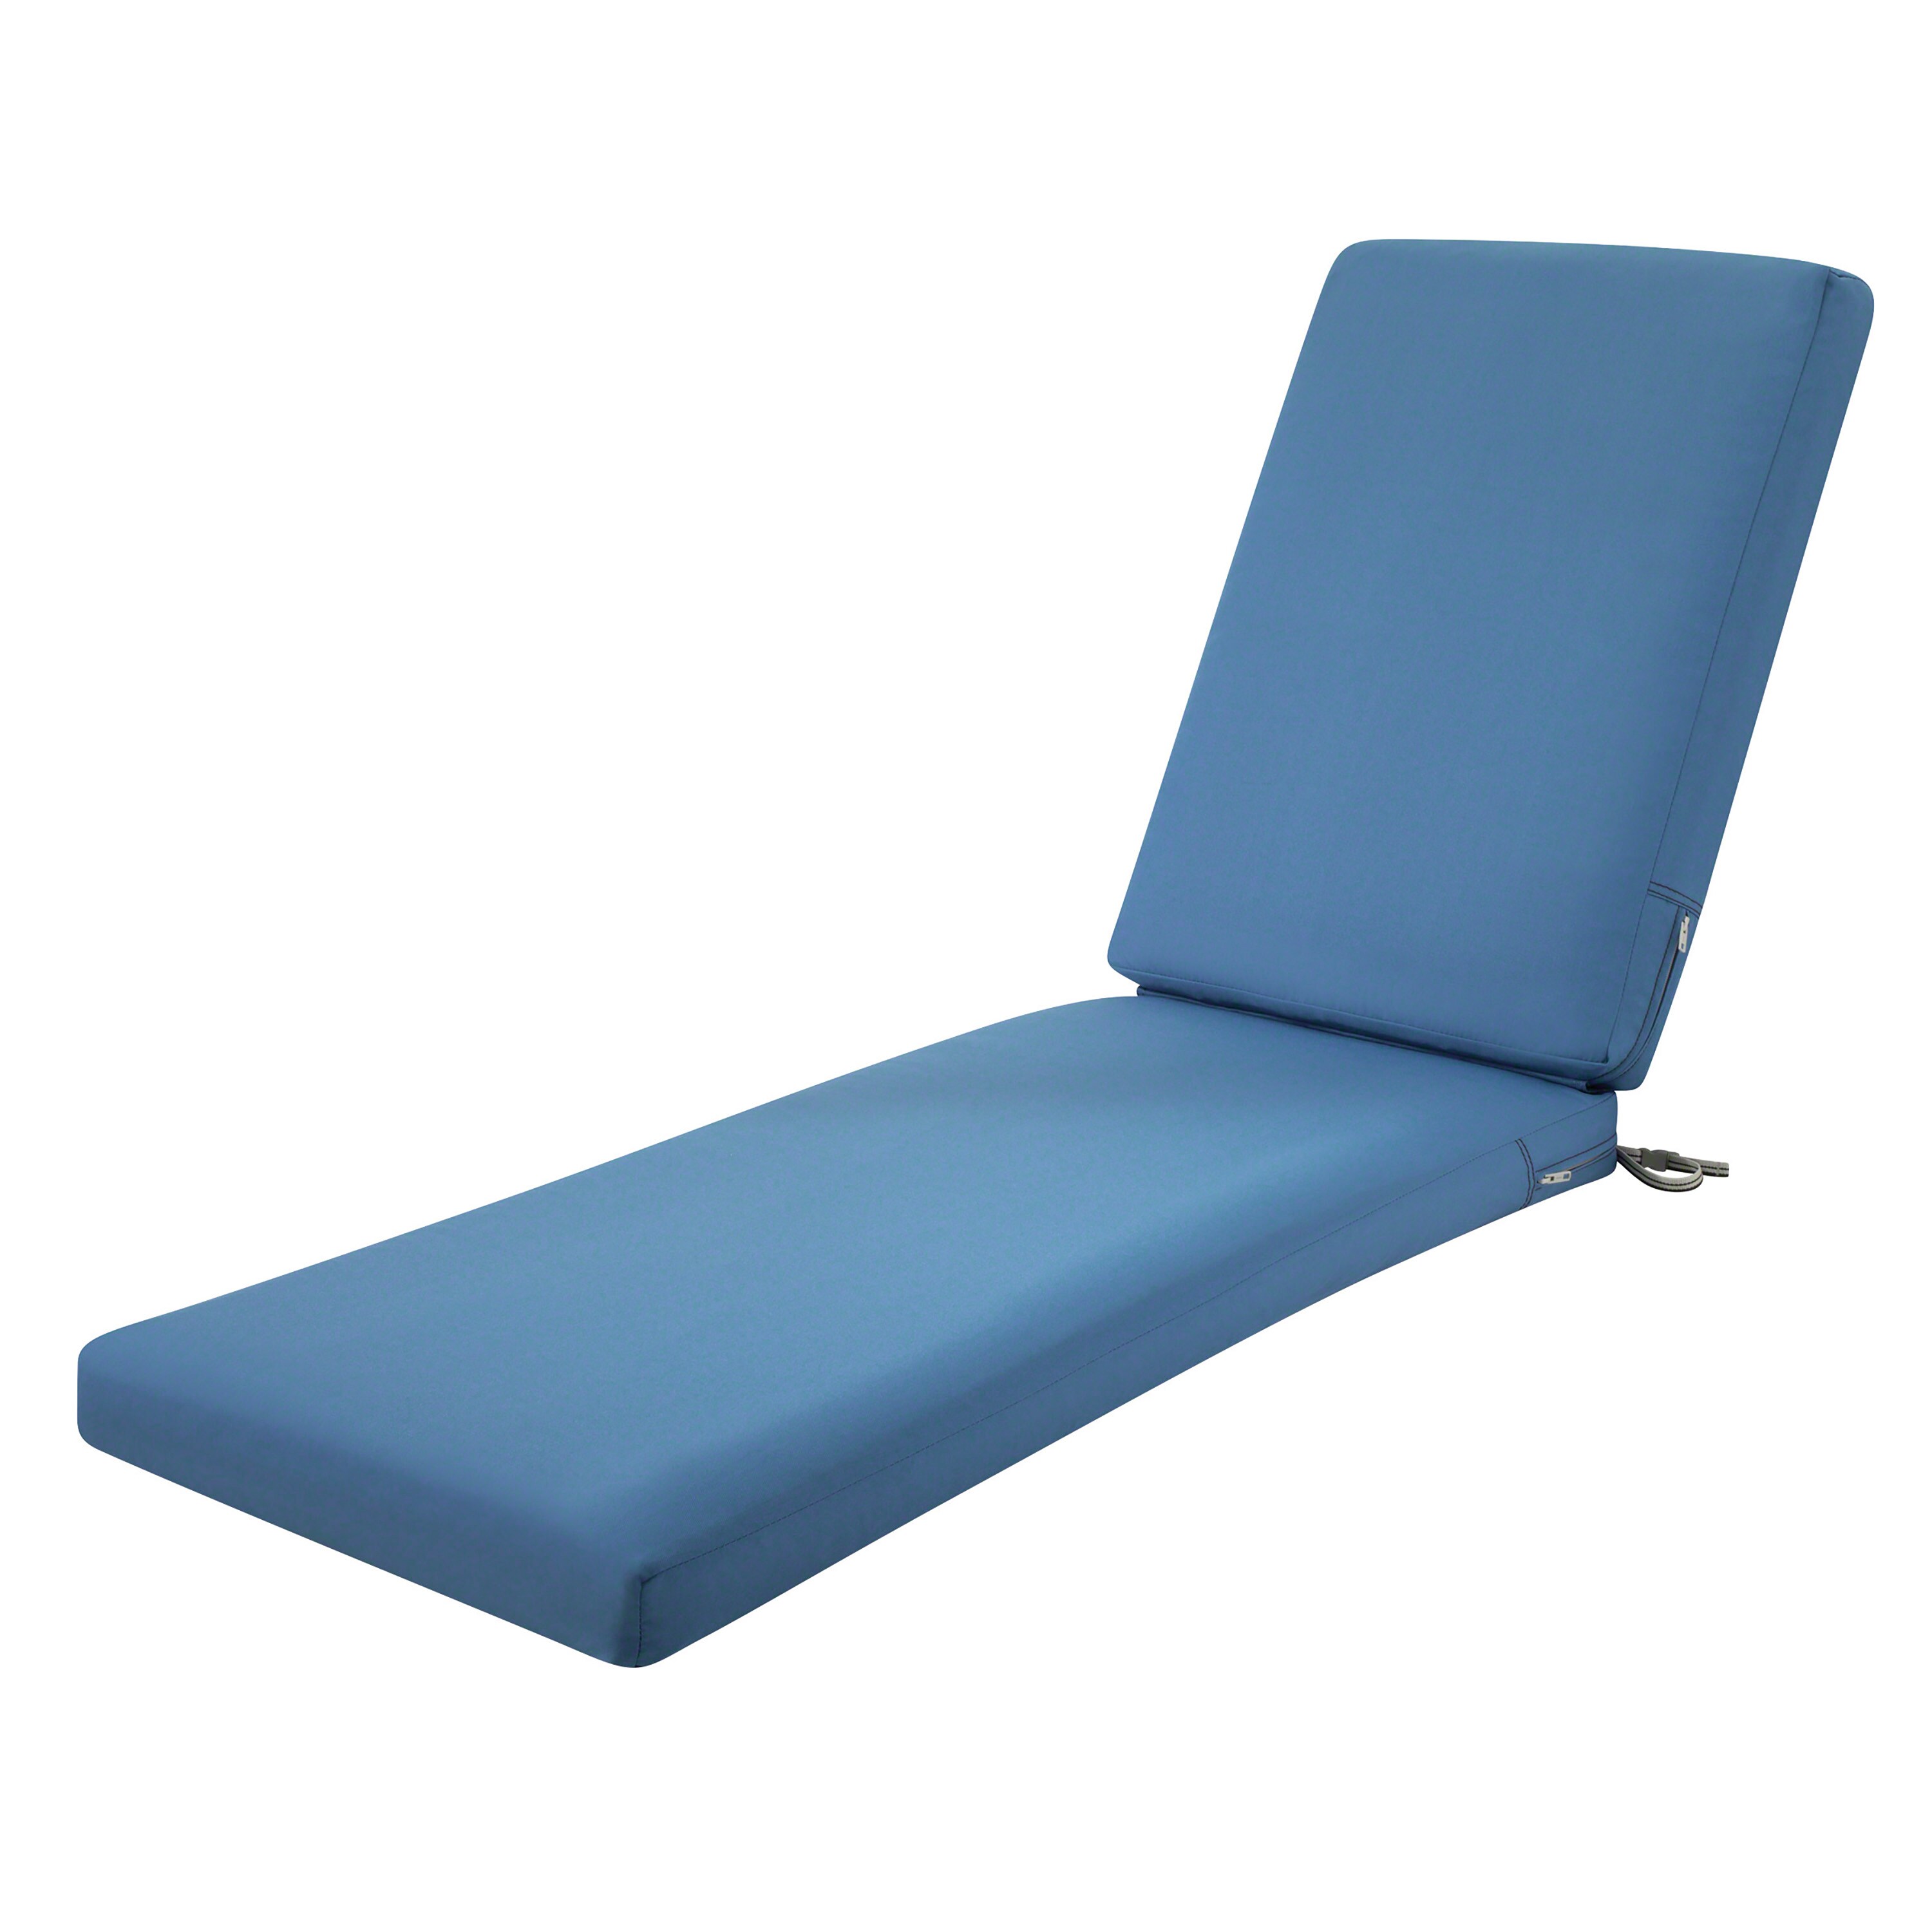 at føre Opmærksom Vurdering Classic Accessories Ravenna 80-in x 26-in 3-Piece Empire Blue Patio Chaise  Lounge Chair Cushion in the Patio Furniture Cushions department at Lowes.com